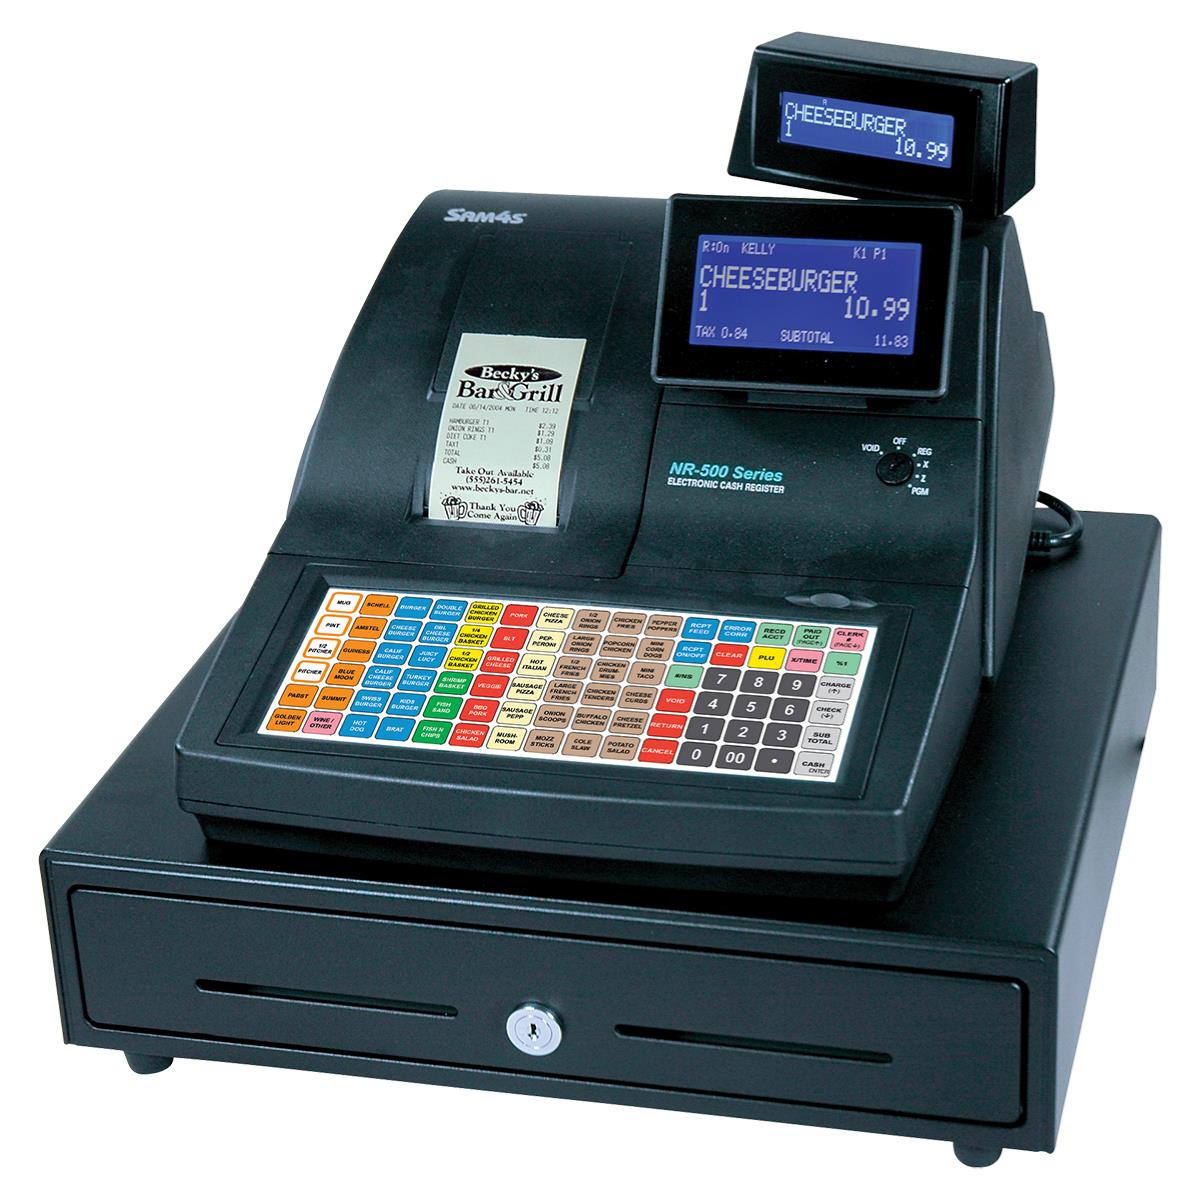 Electronic cash register with a built-in printer and customer display, showing a cheeseburger purchase on the screen.